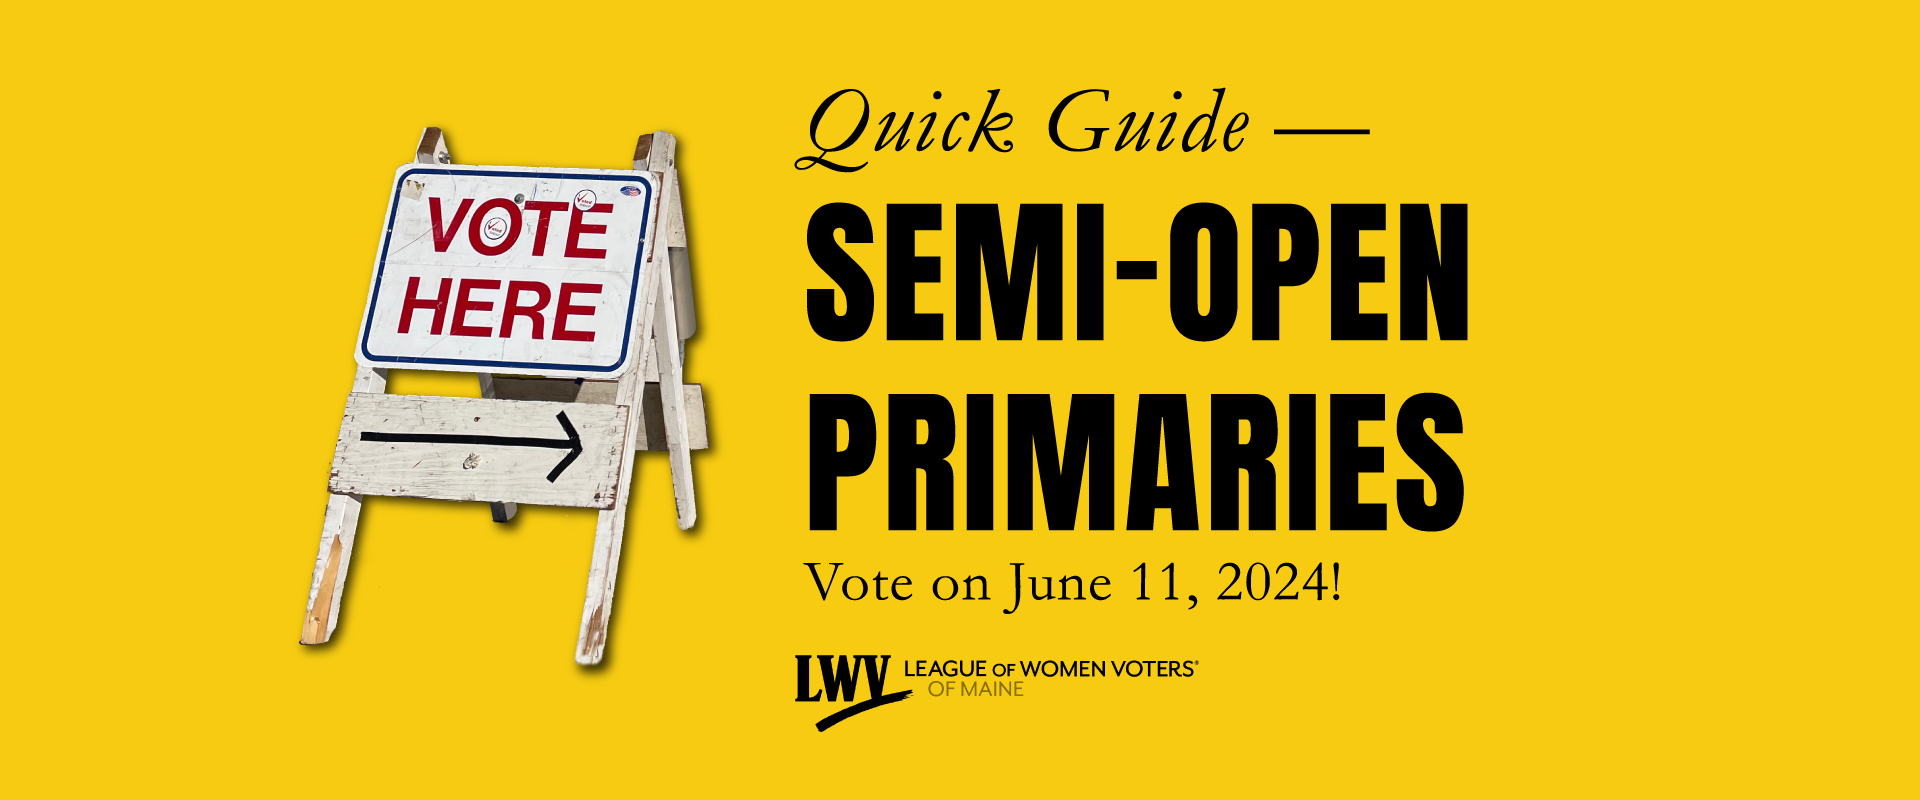 Your Guide to semi-open primaries